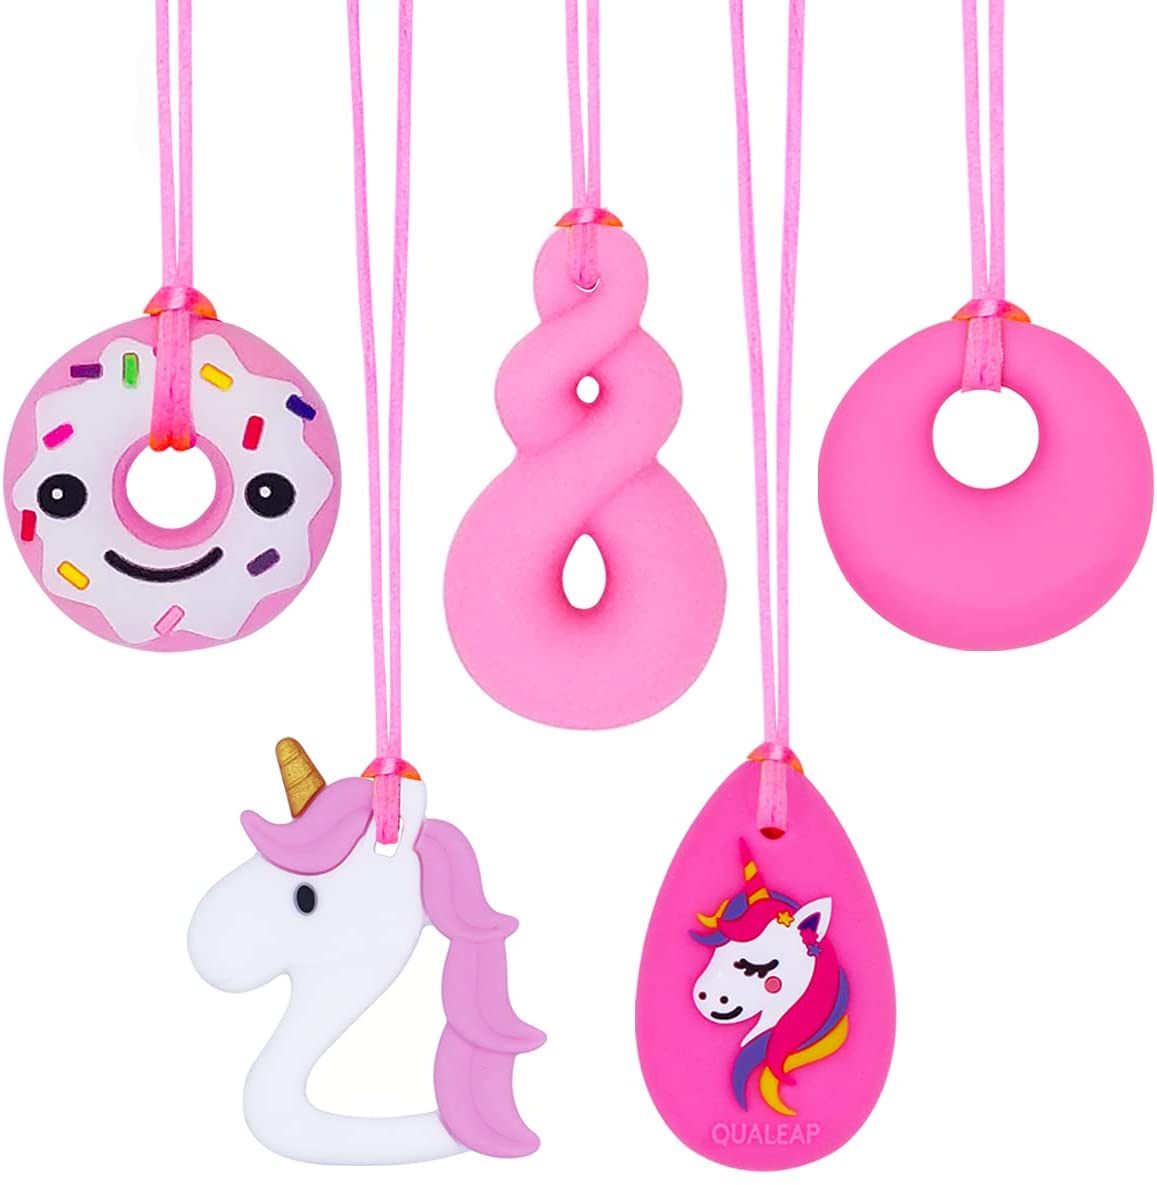 Baby Silicone Lovely Fruits Pendant Teether Soother Chew Toy Teething NecklaceSP 